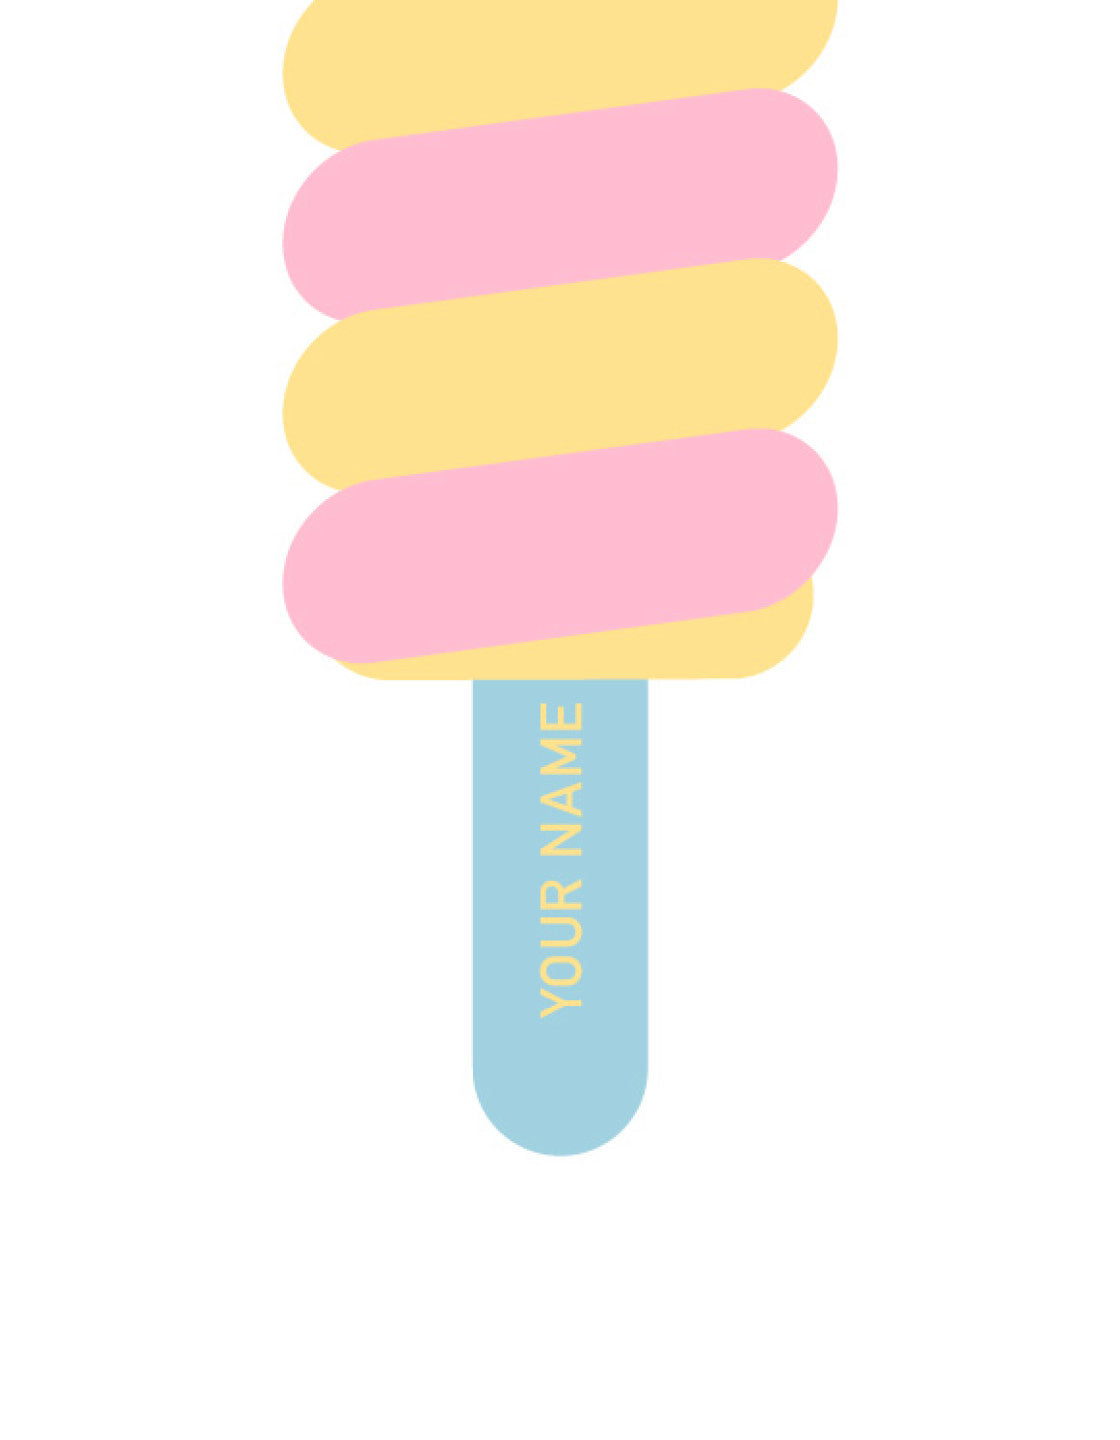 twister ice lolly print with pink and yellow swirls and a pale blue stick on a white background